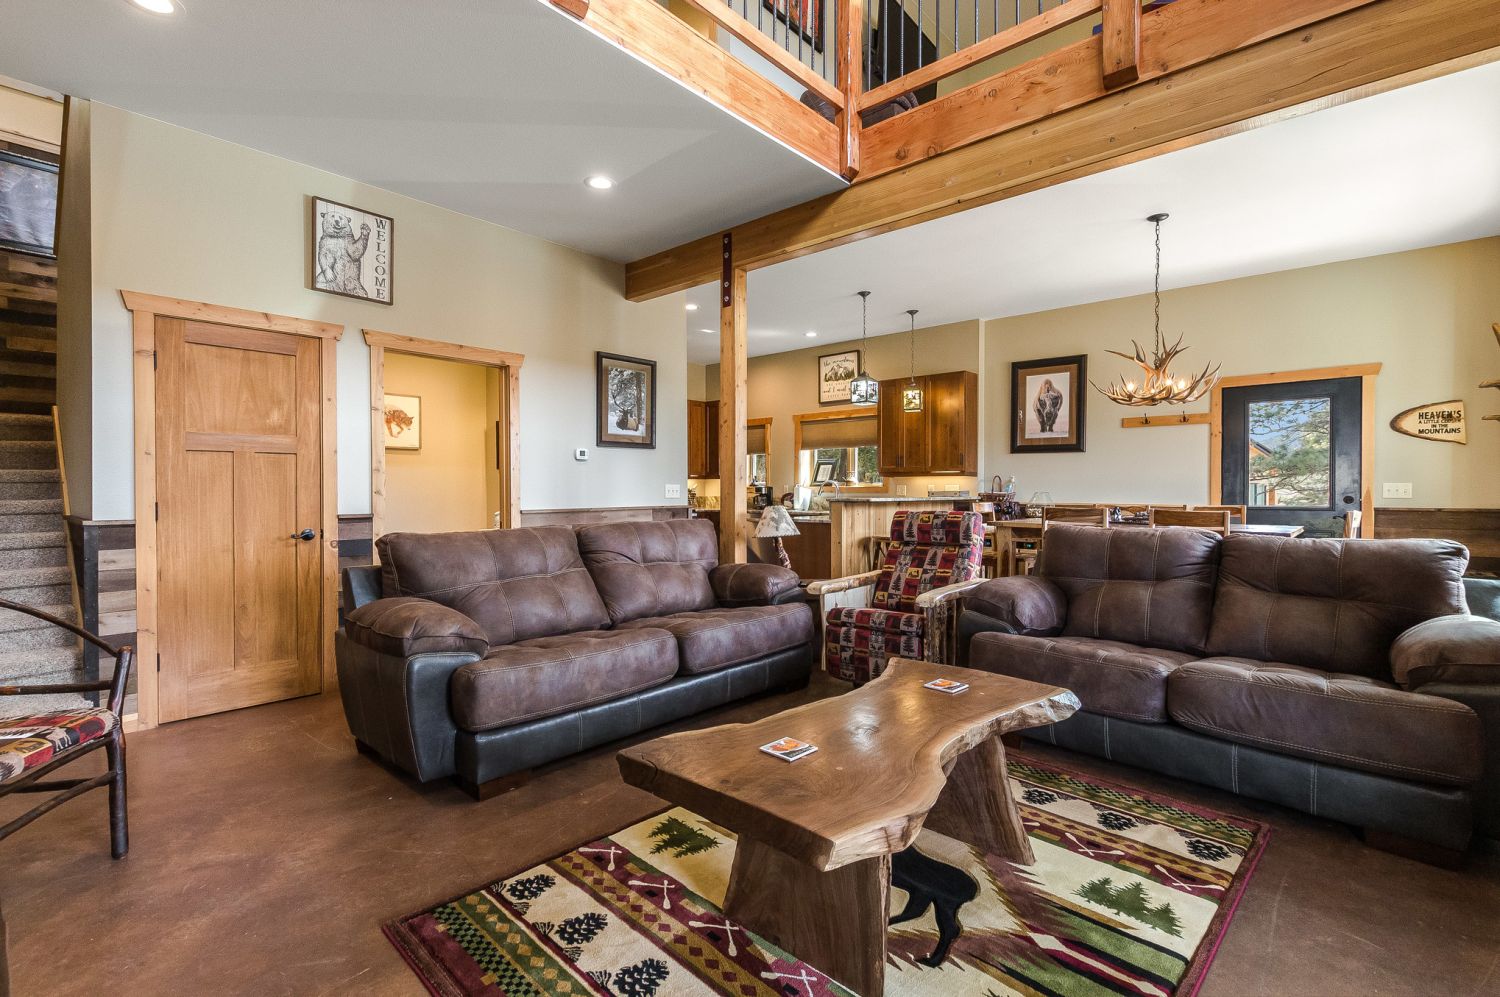 Show Me Mountain Views - The living area features a large flatscreen TV, a fireplace, rustic wooden accent furniture, and comfy couches